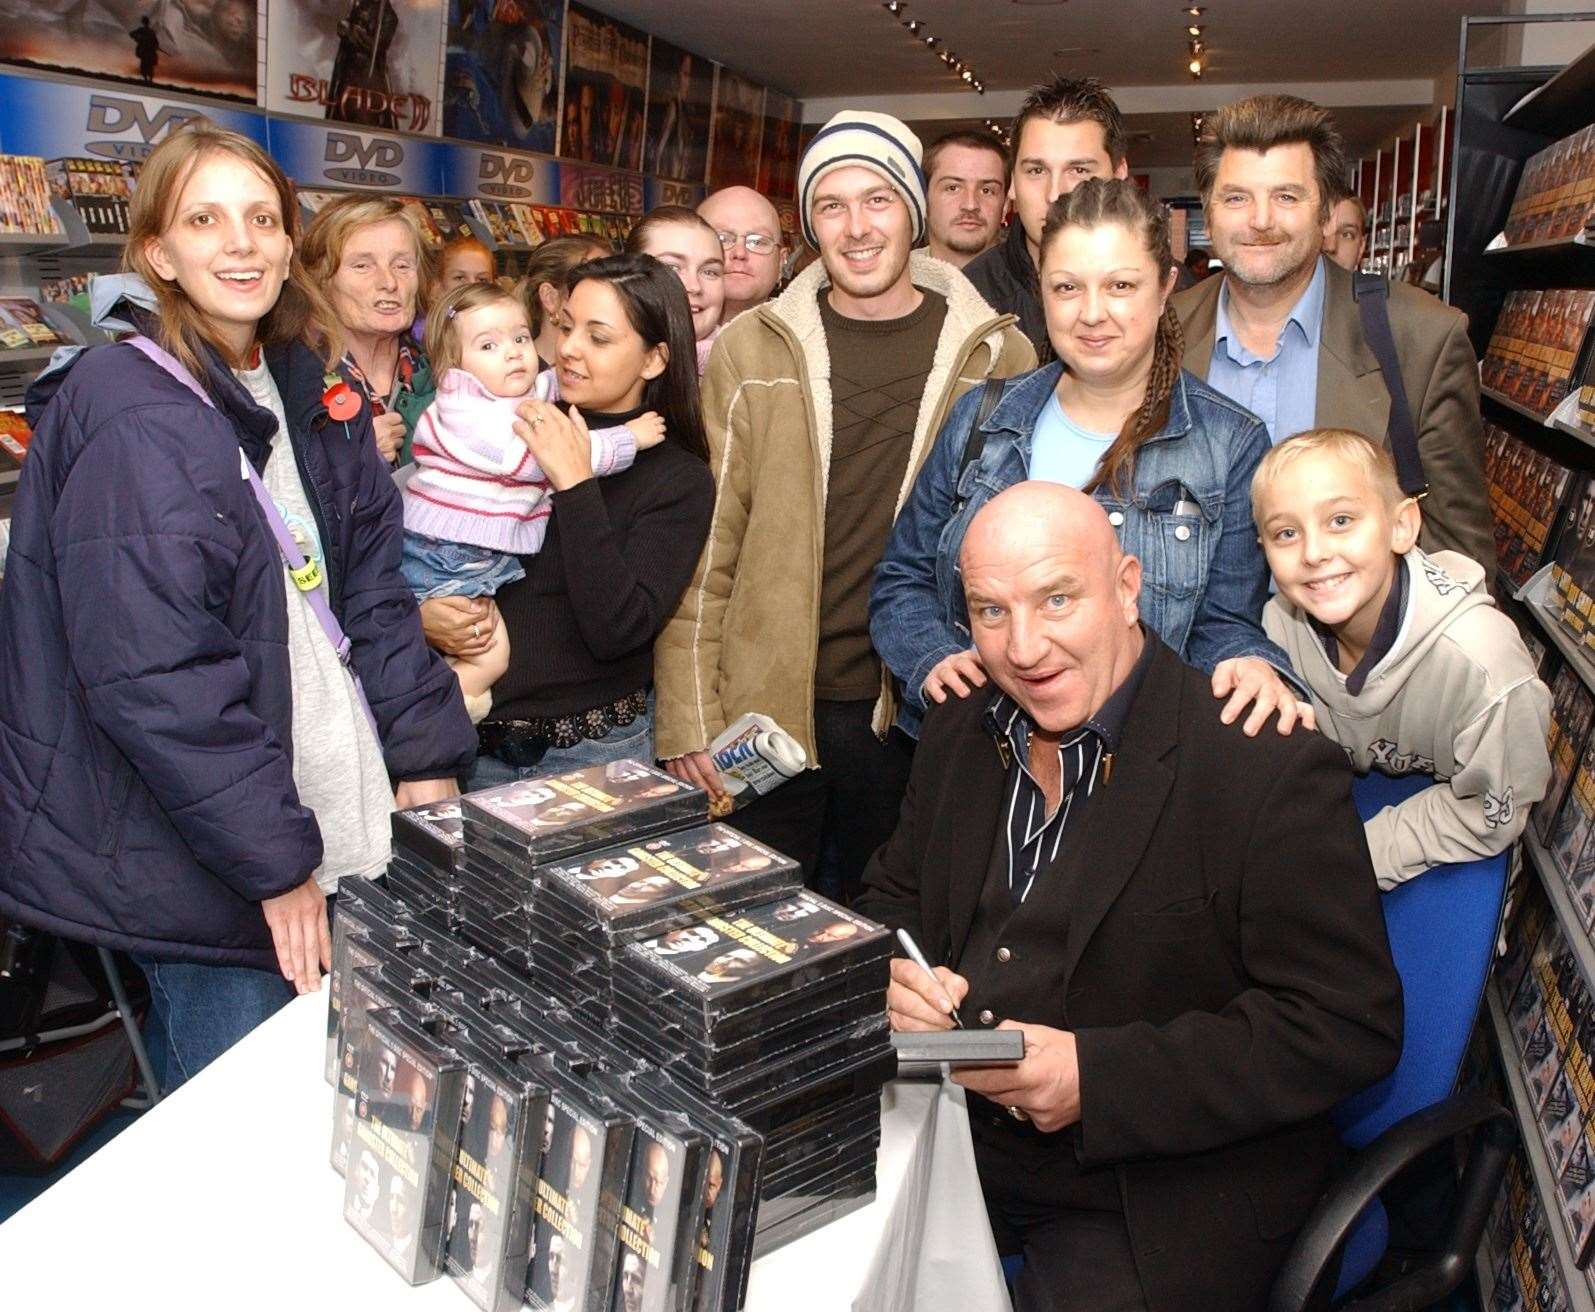 Dave Courtney signing copies of his DVD at Air Entertainment in Chatham High Street in 2005. Picture: Jim Rantell